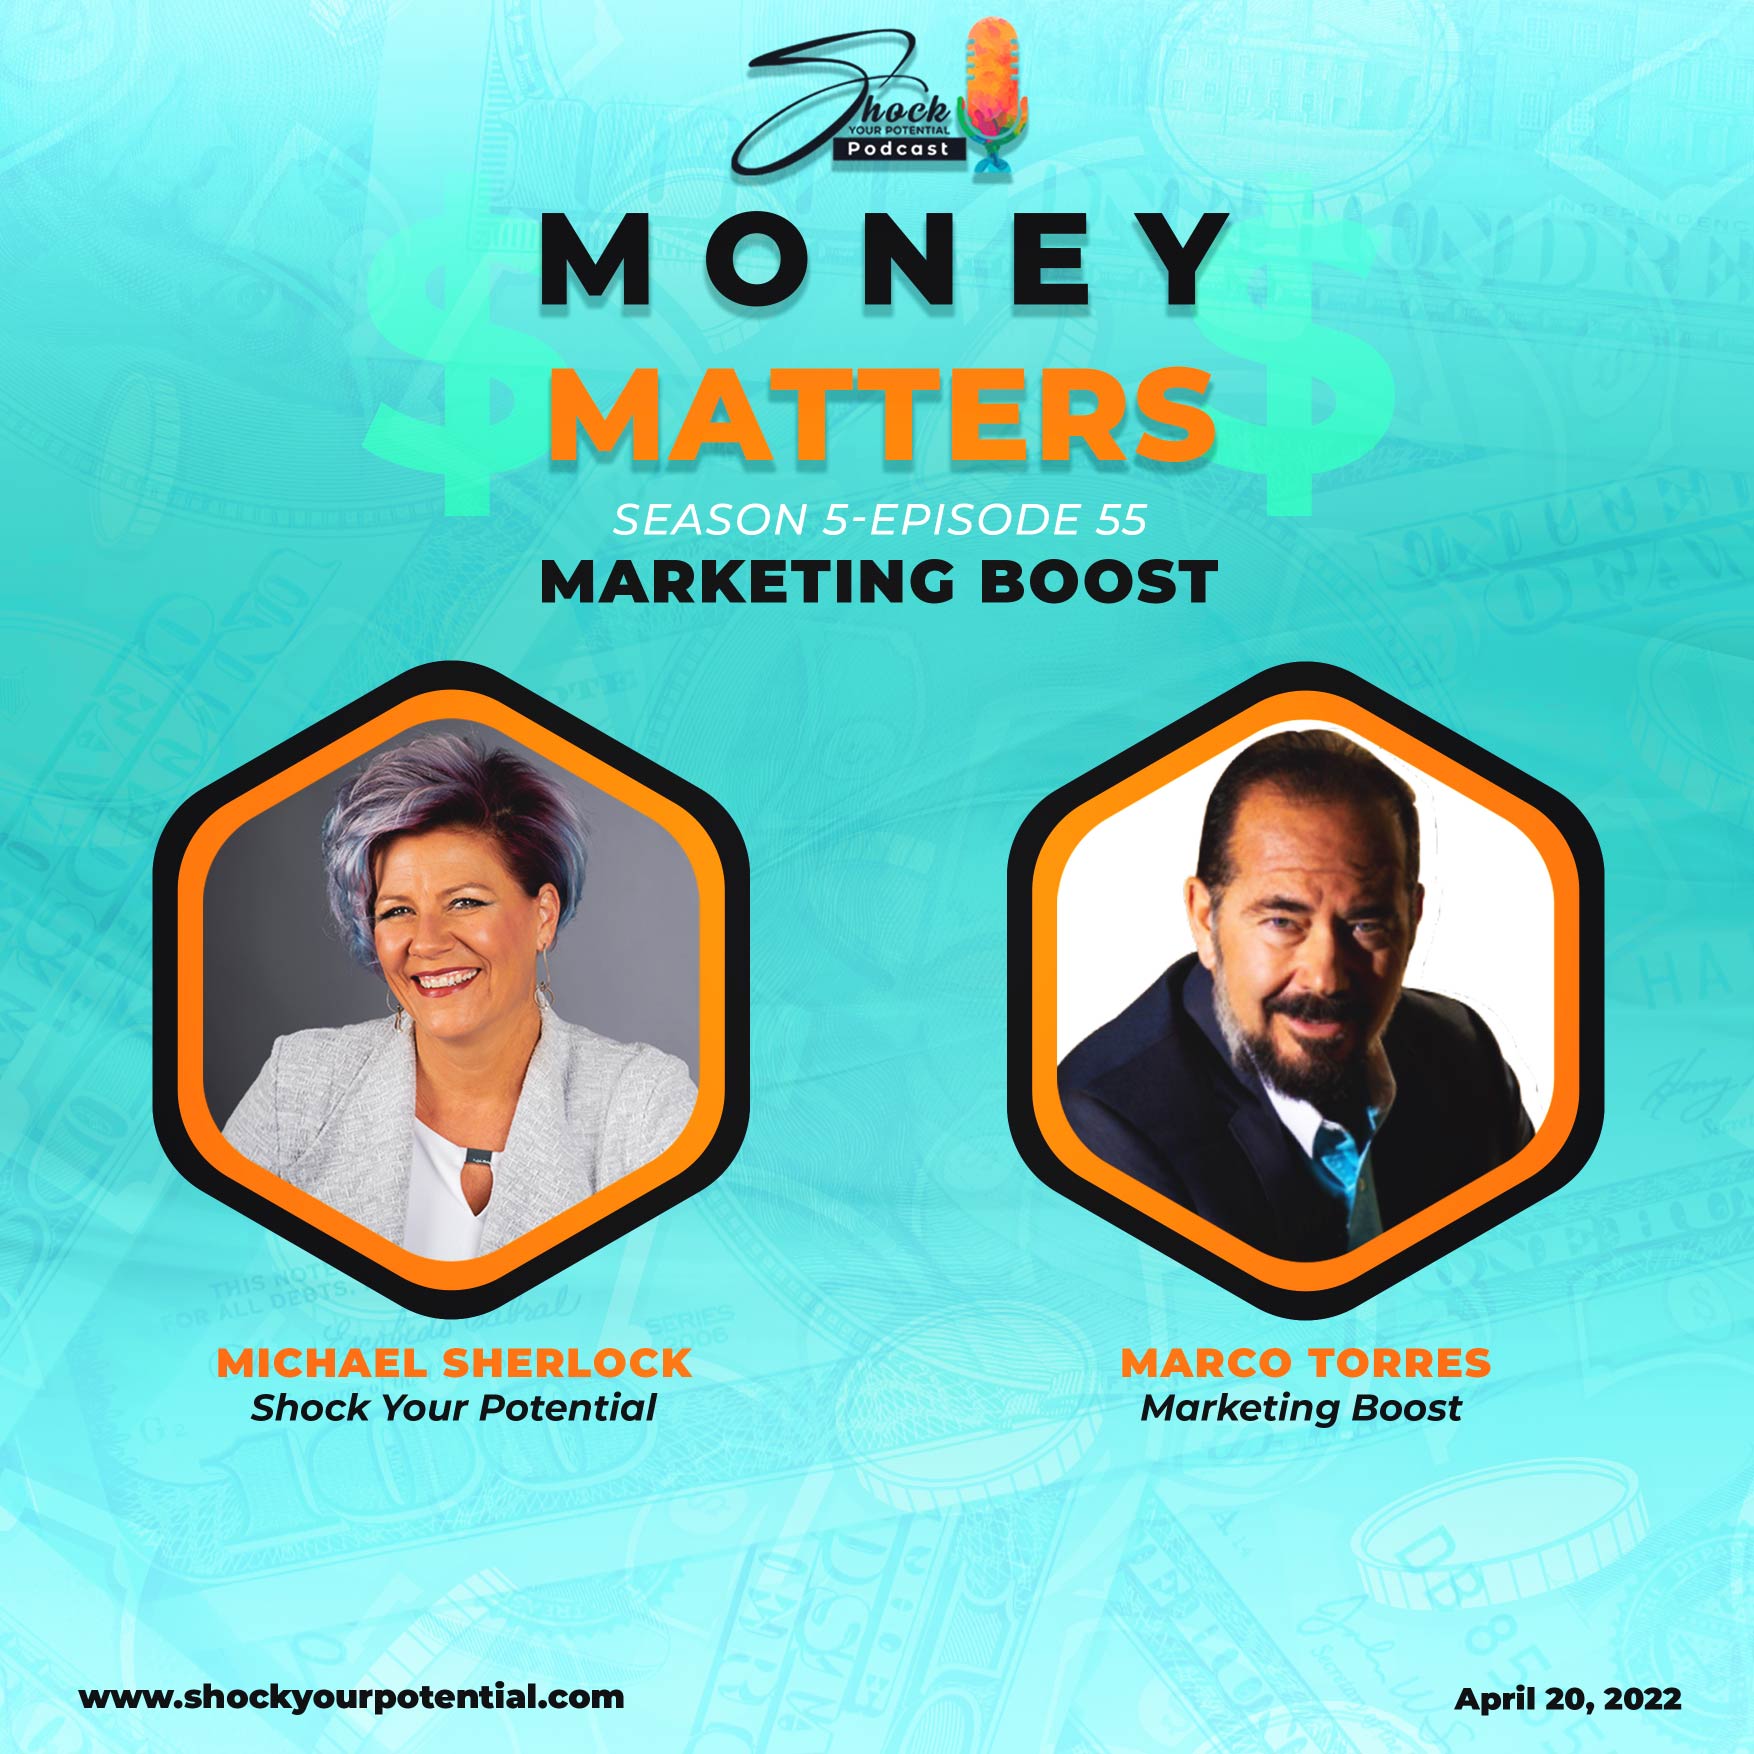 Marketing Boost – Marco Torres